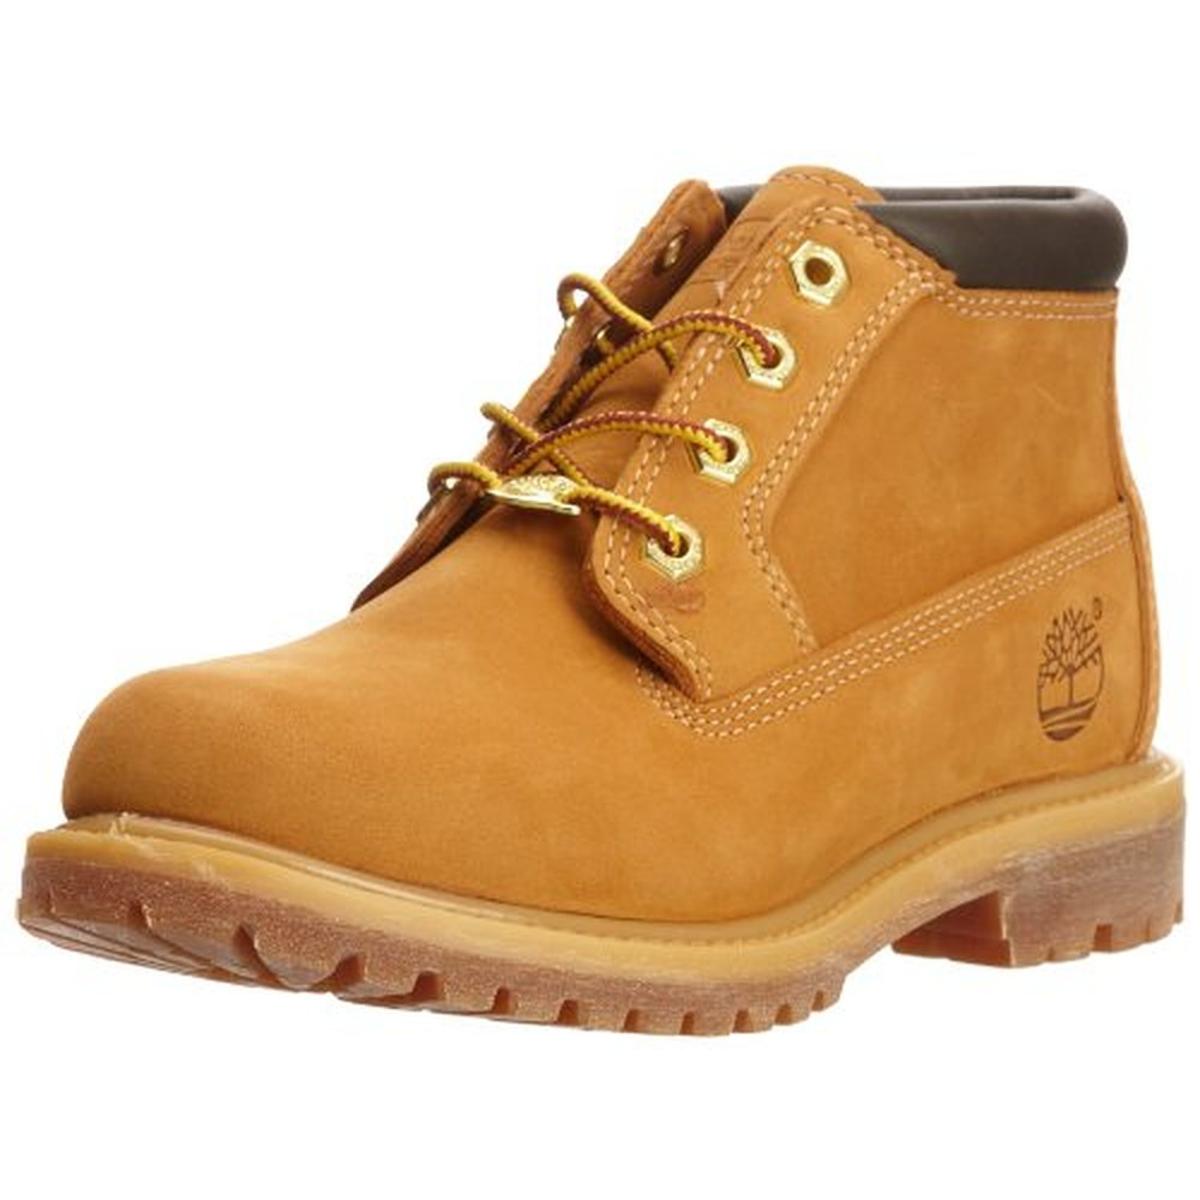 Timberland Womens Nellie Tan Leather Ankle Boots Shoes 11 Wide (C,D,W) BHFO 8456 | eBay